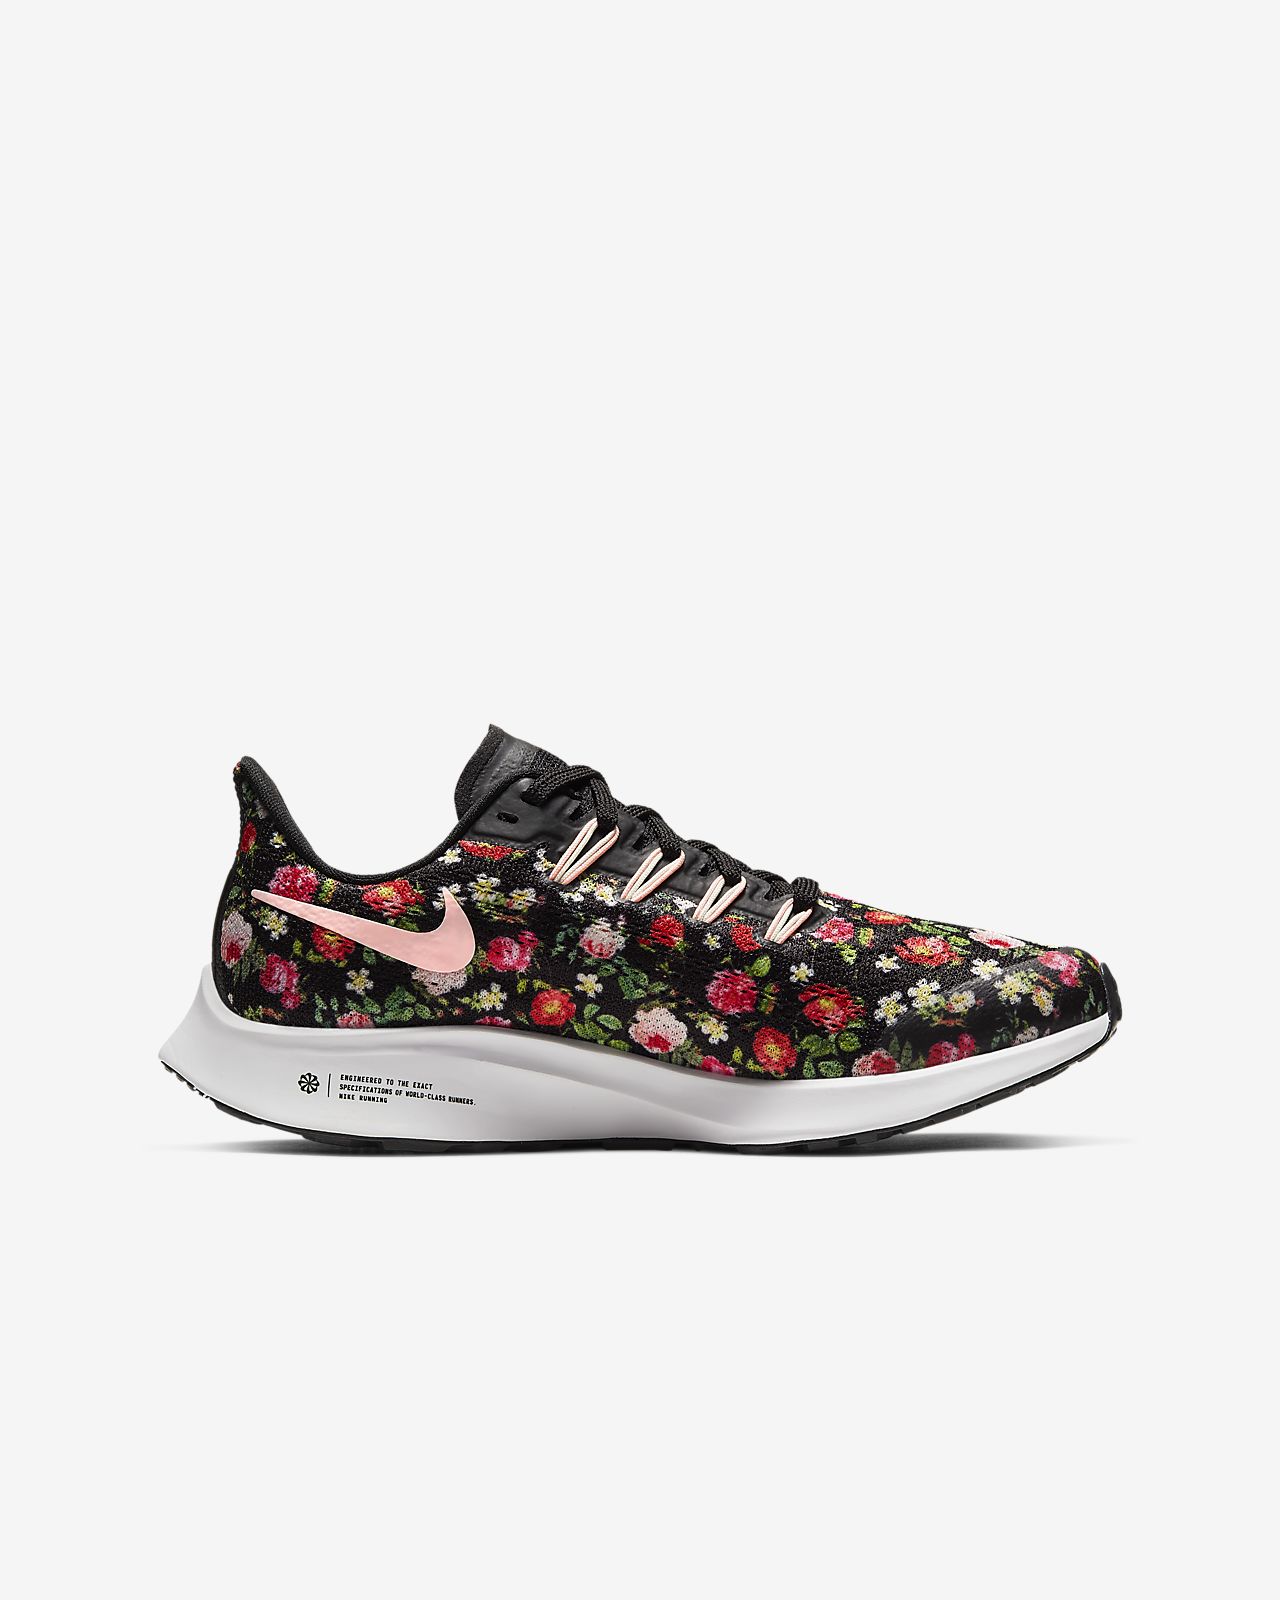 nike running shoes with flowers